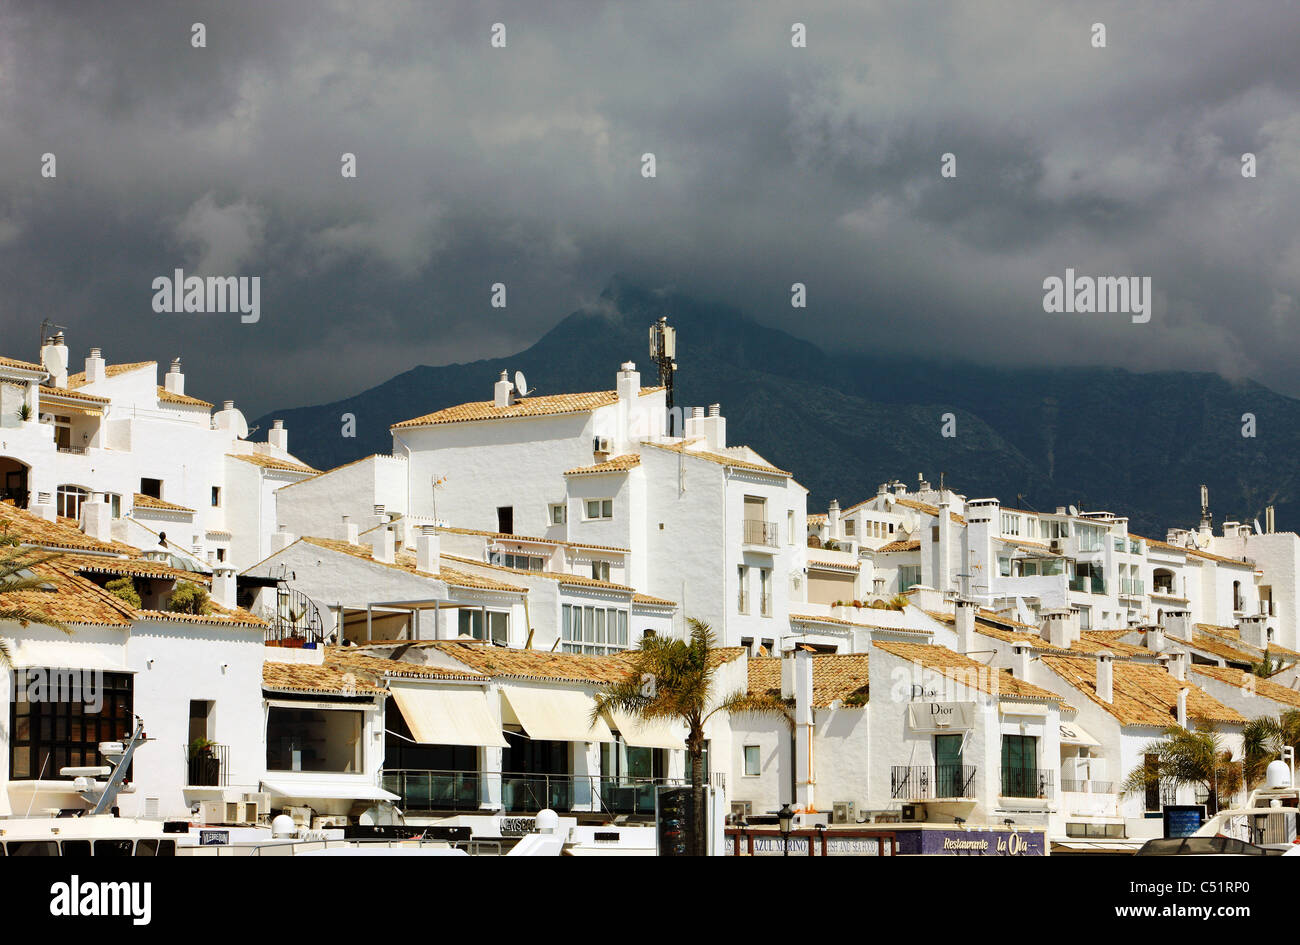 A dark sky over the mountains at Puerto Banus Spain Stock Photo